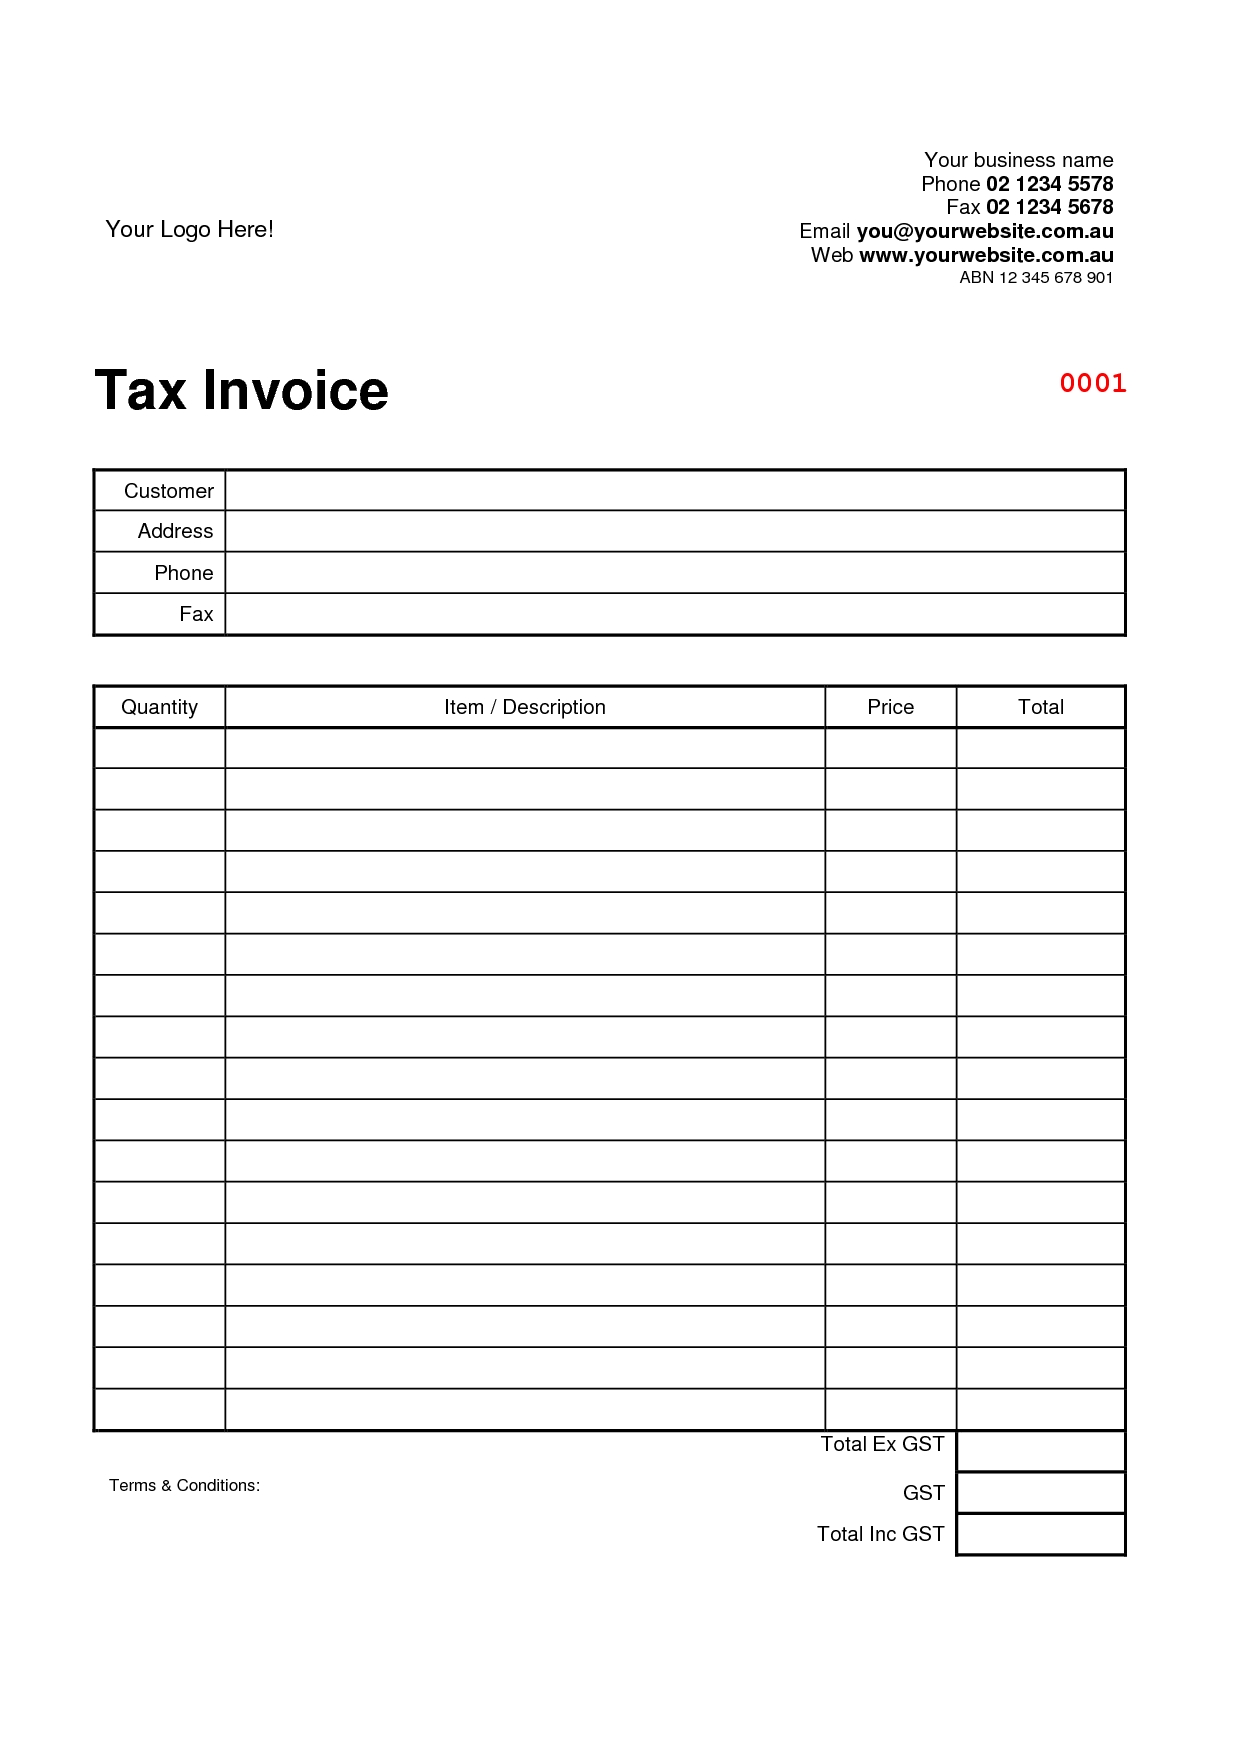 Tax Invoice Excel Template Invoice Template Ideas